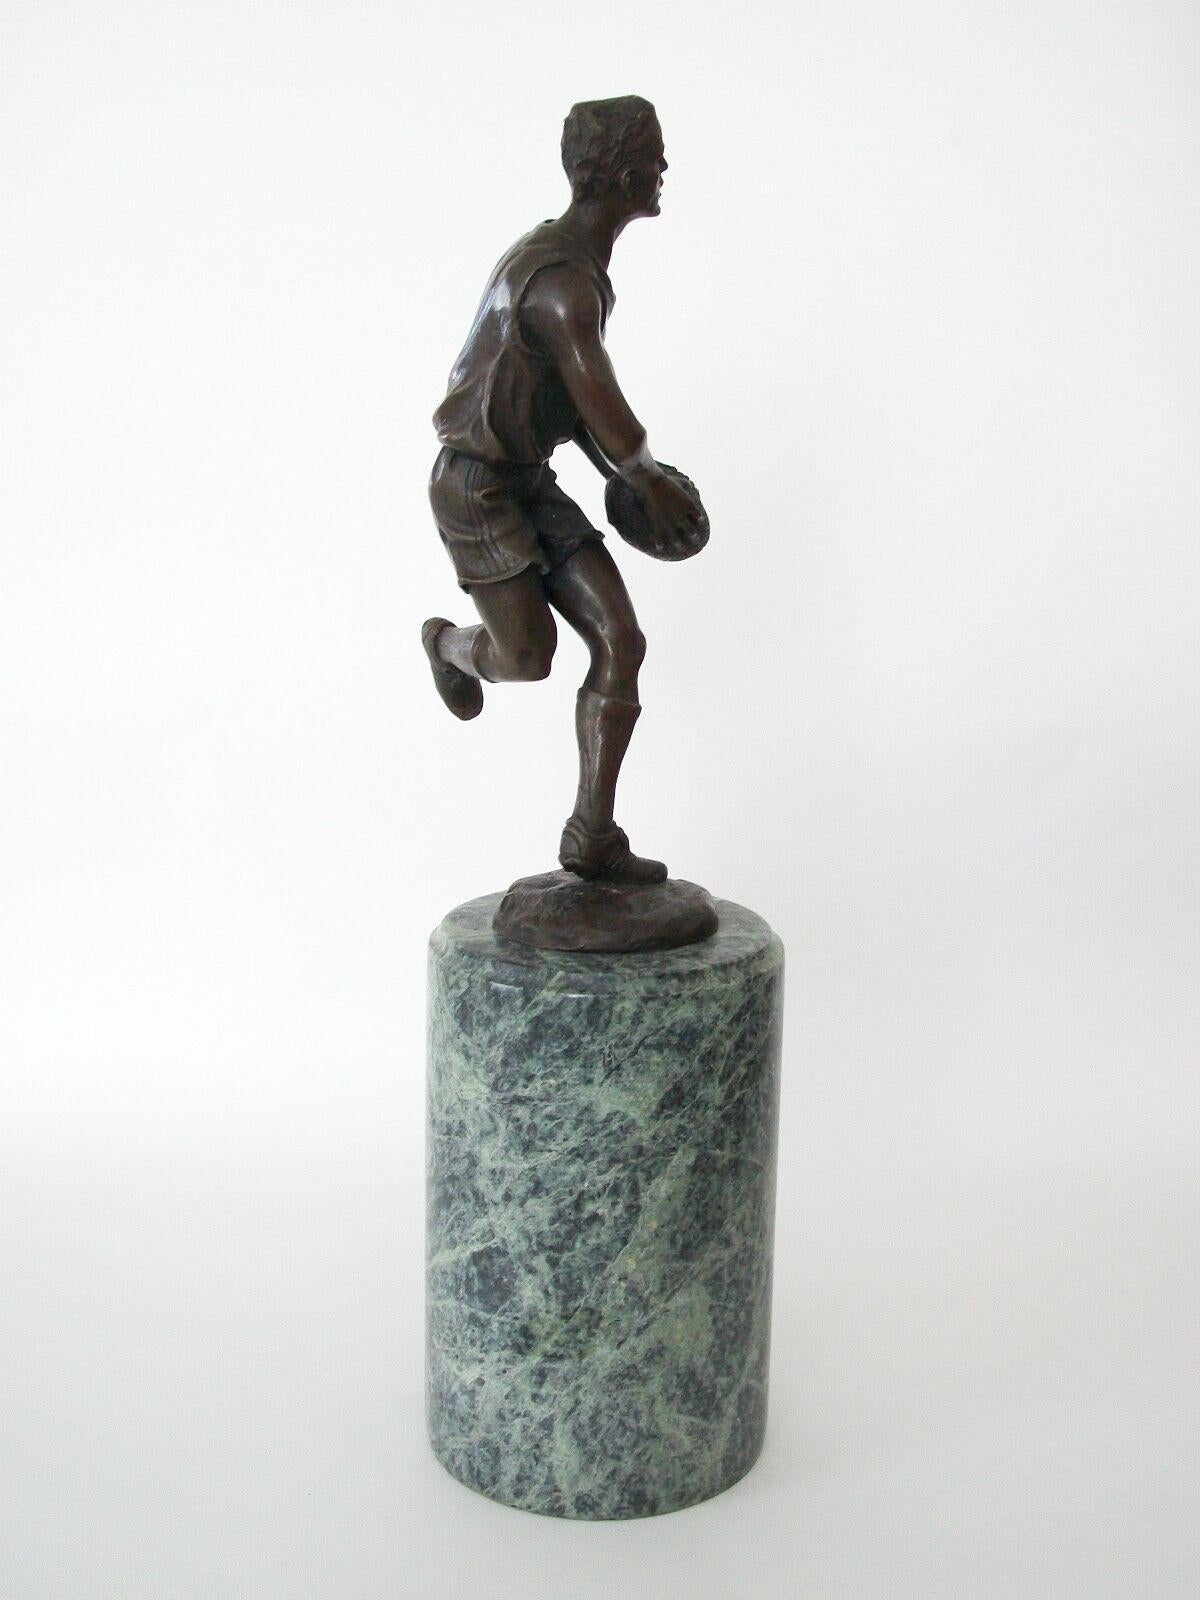 Hand-Crafted MIGUEL FERNANDO LOPEZ (MILO) - Bronze Rugby Player - Portugal - 20th Century For Sale